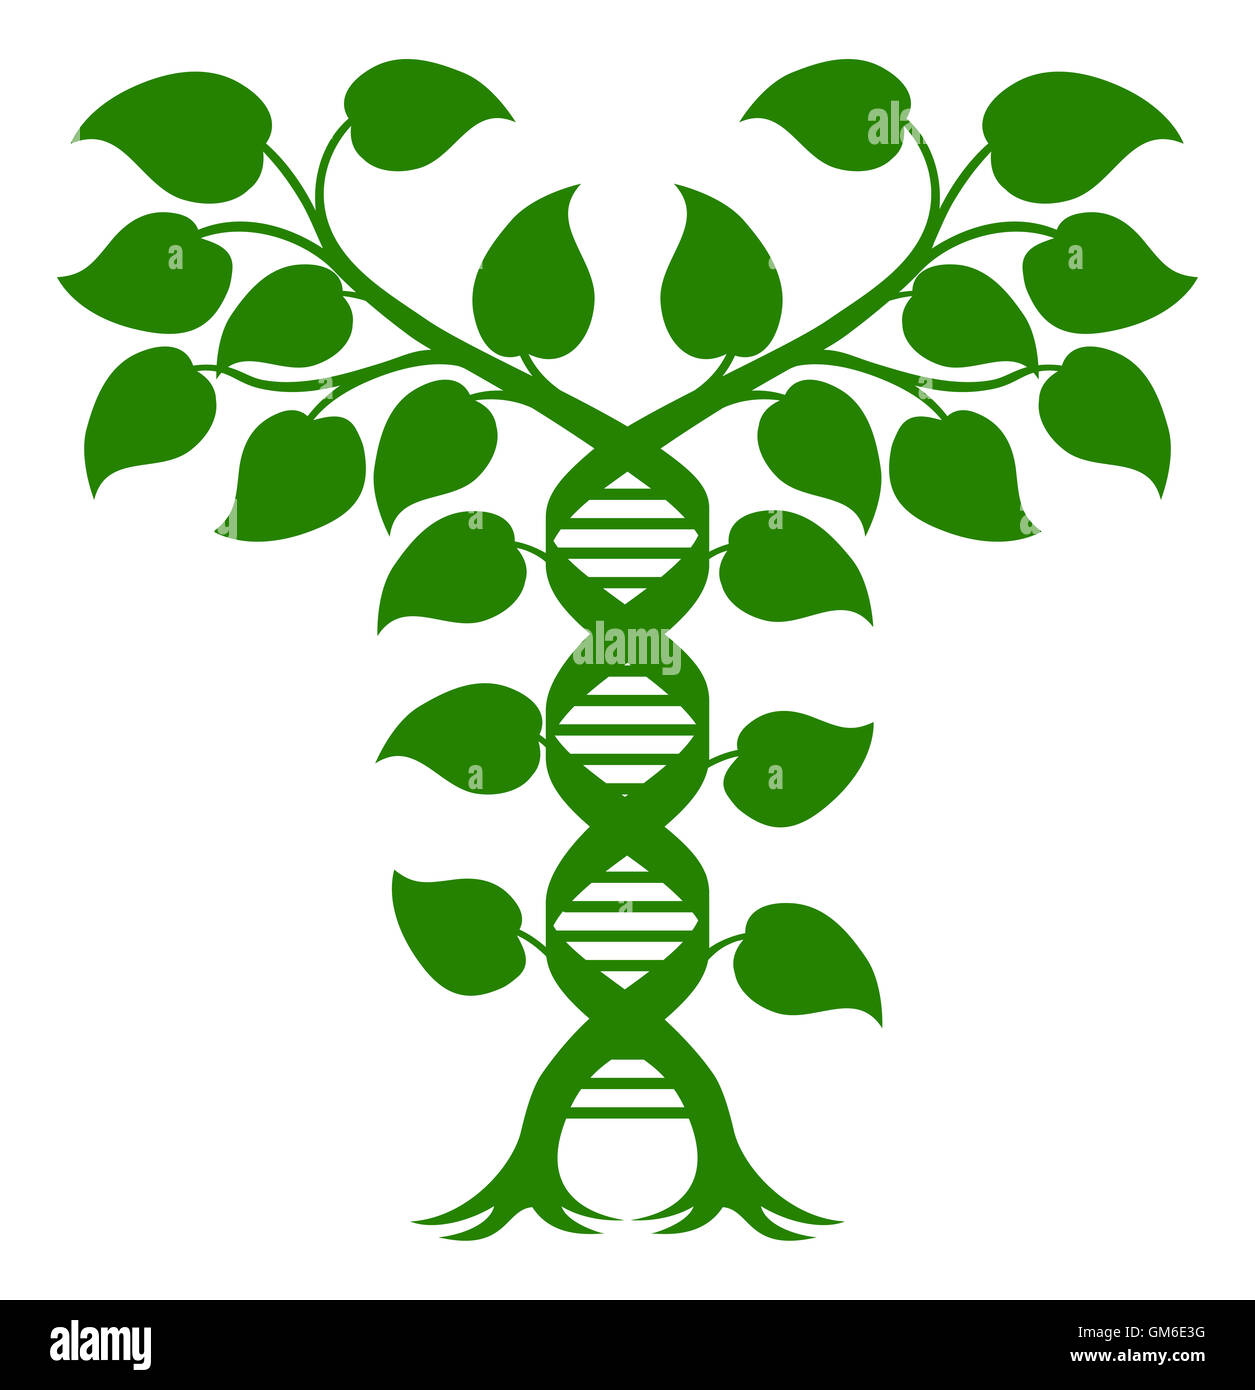 DNA Plant Double Helix Concept, can refer to alternative medicine, crop gene modification or other healthcare or medical theme. Stock Photo